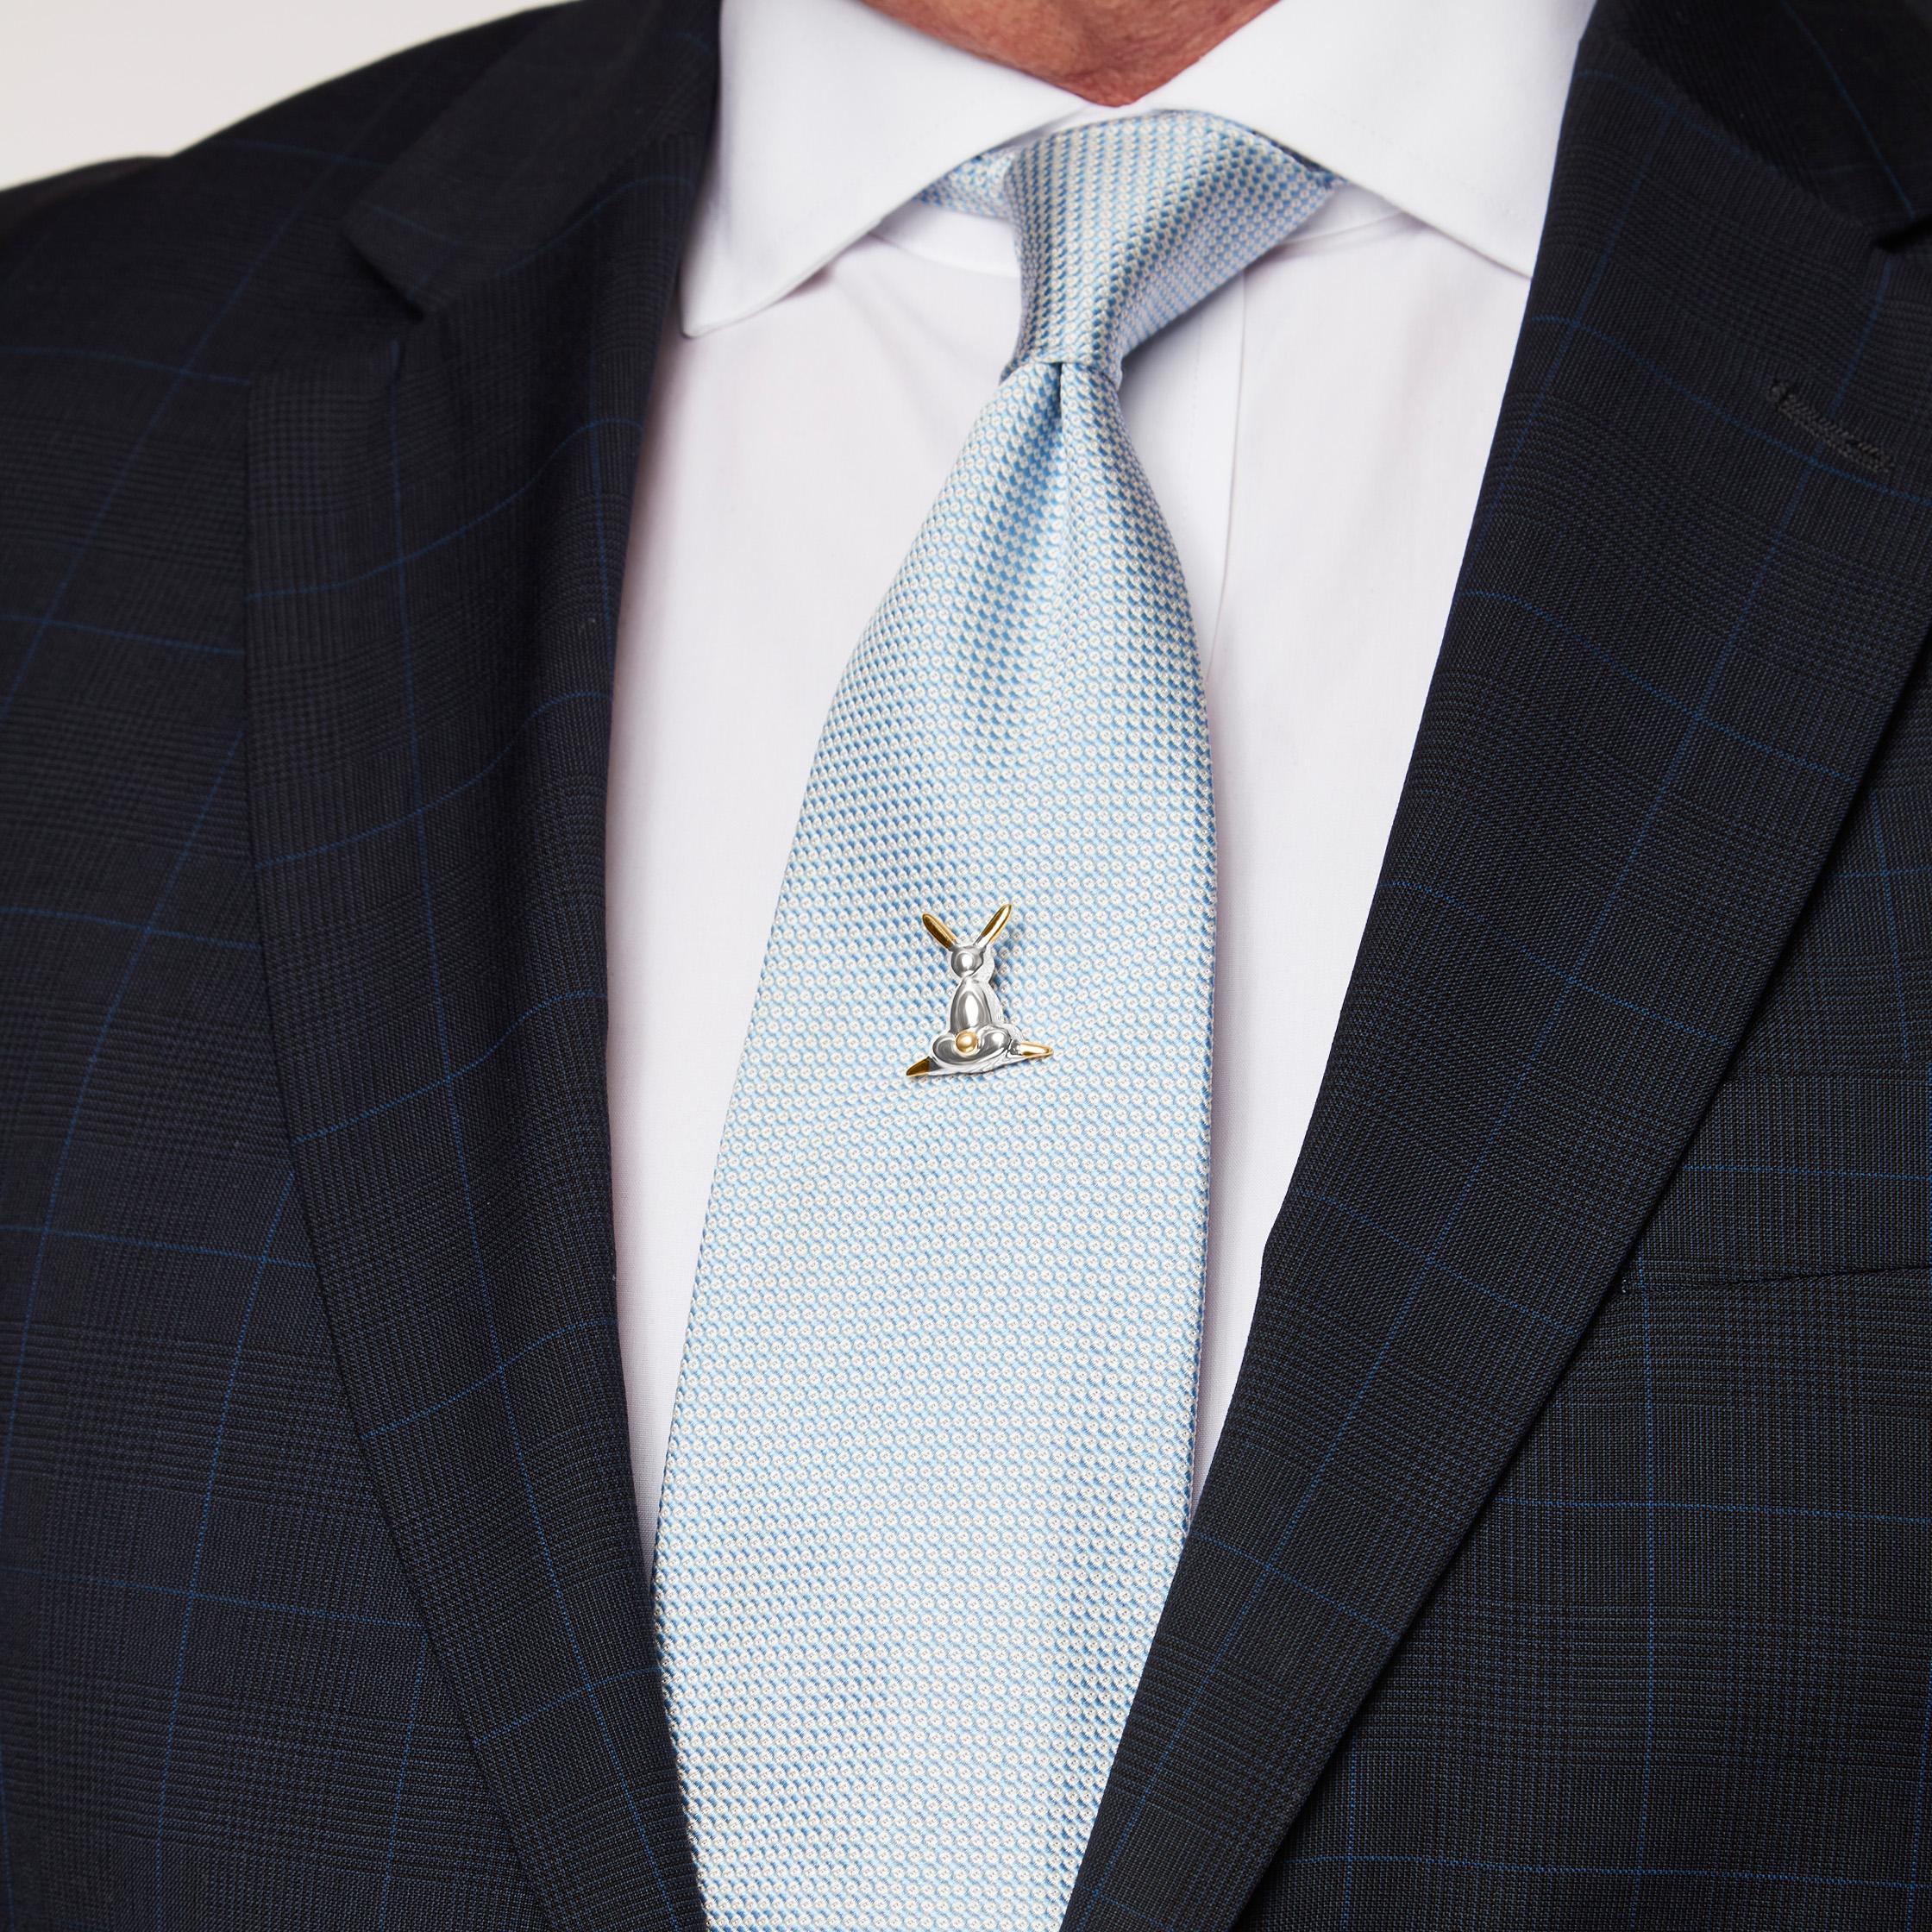 A unique Lucky Rabbit tie pin, handmade in 18K yellow gold and platinum.

Throughout history, rabbits have been regarded as a symbol of prosperity, longevity, peace and compassion. They are a beautiful reminder of new beginnings, springtime, hope